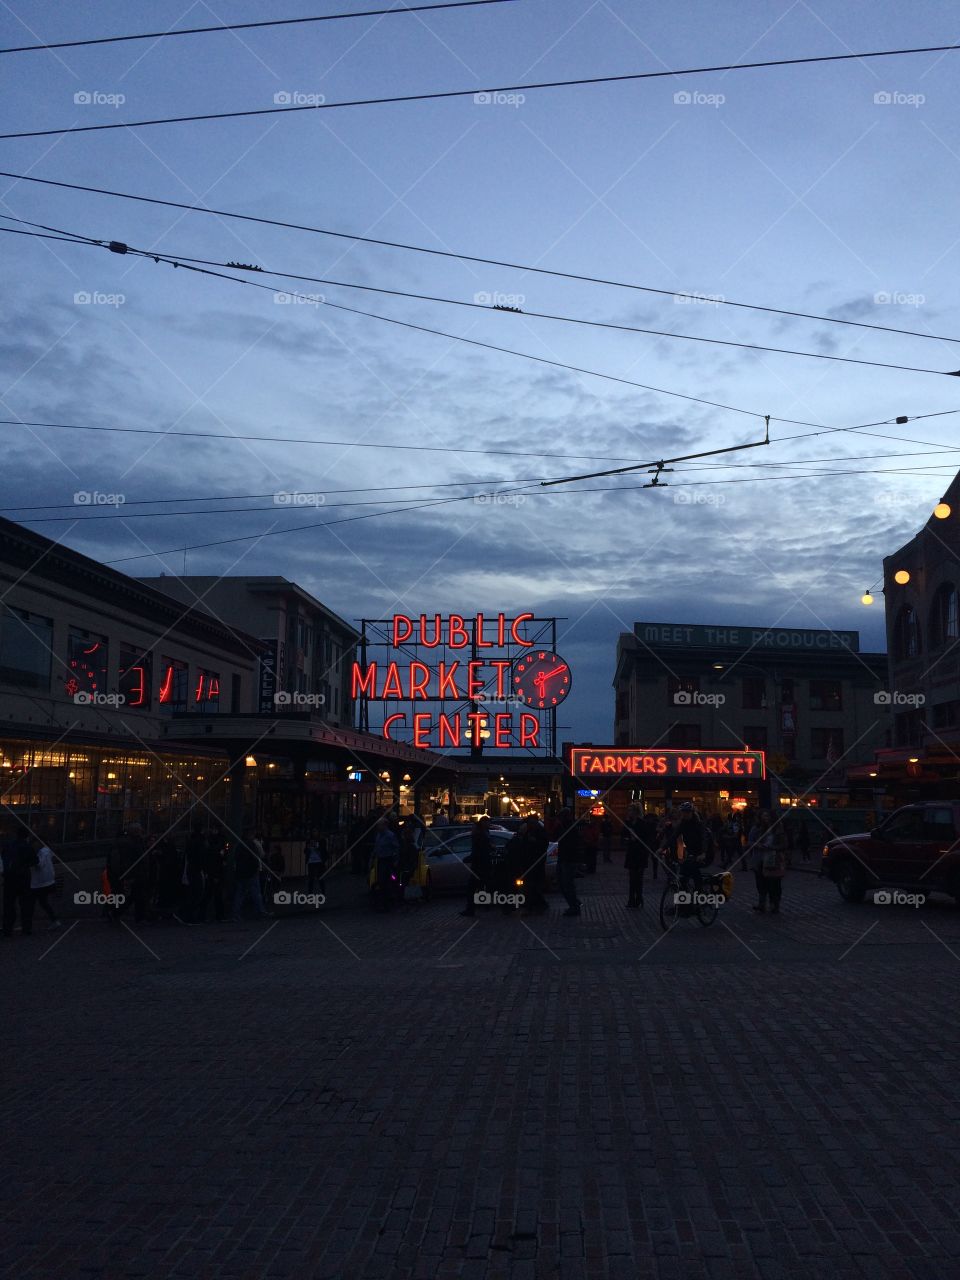 Pike place